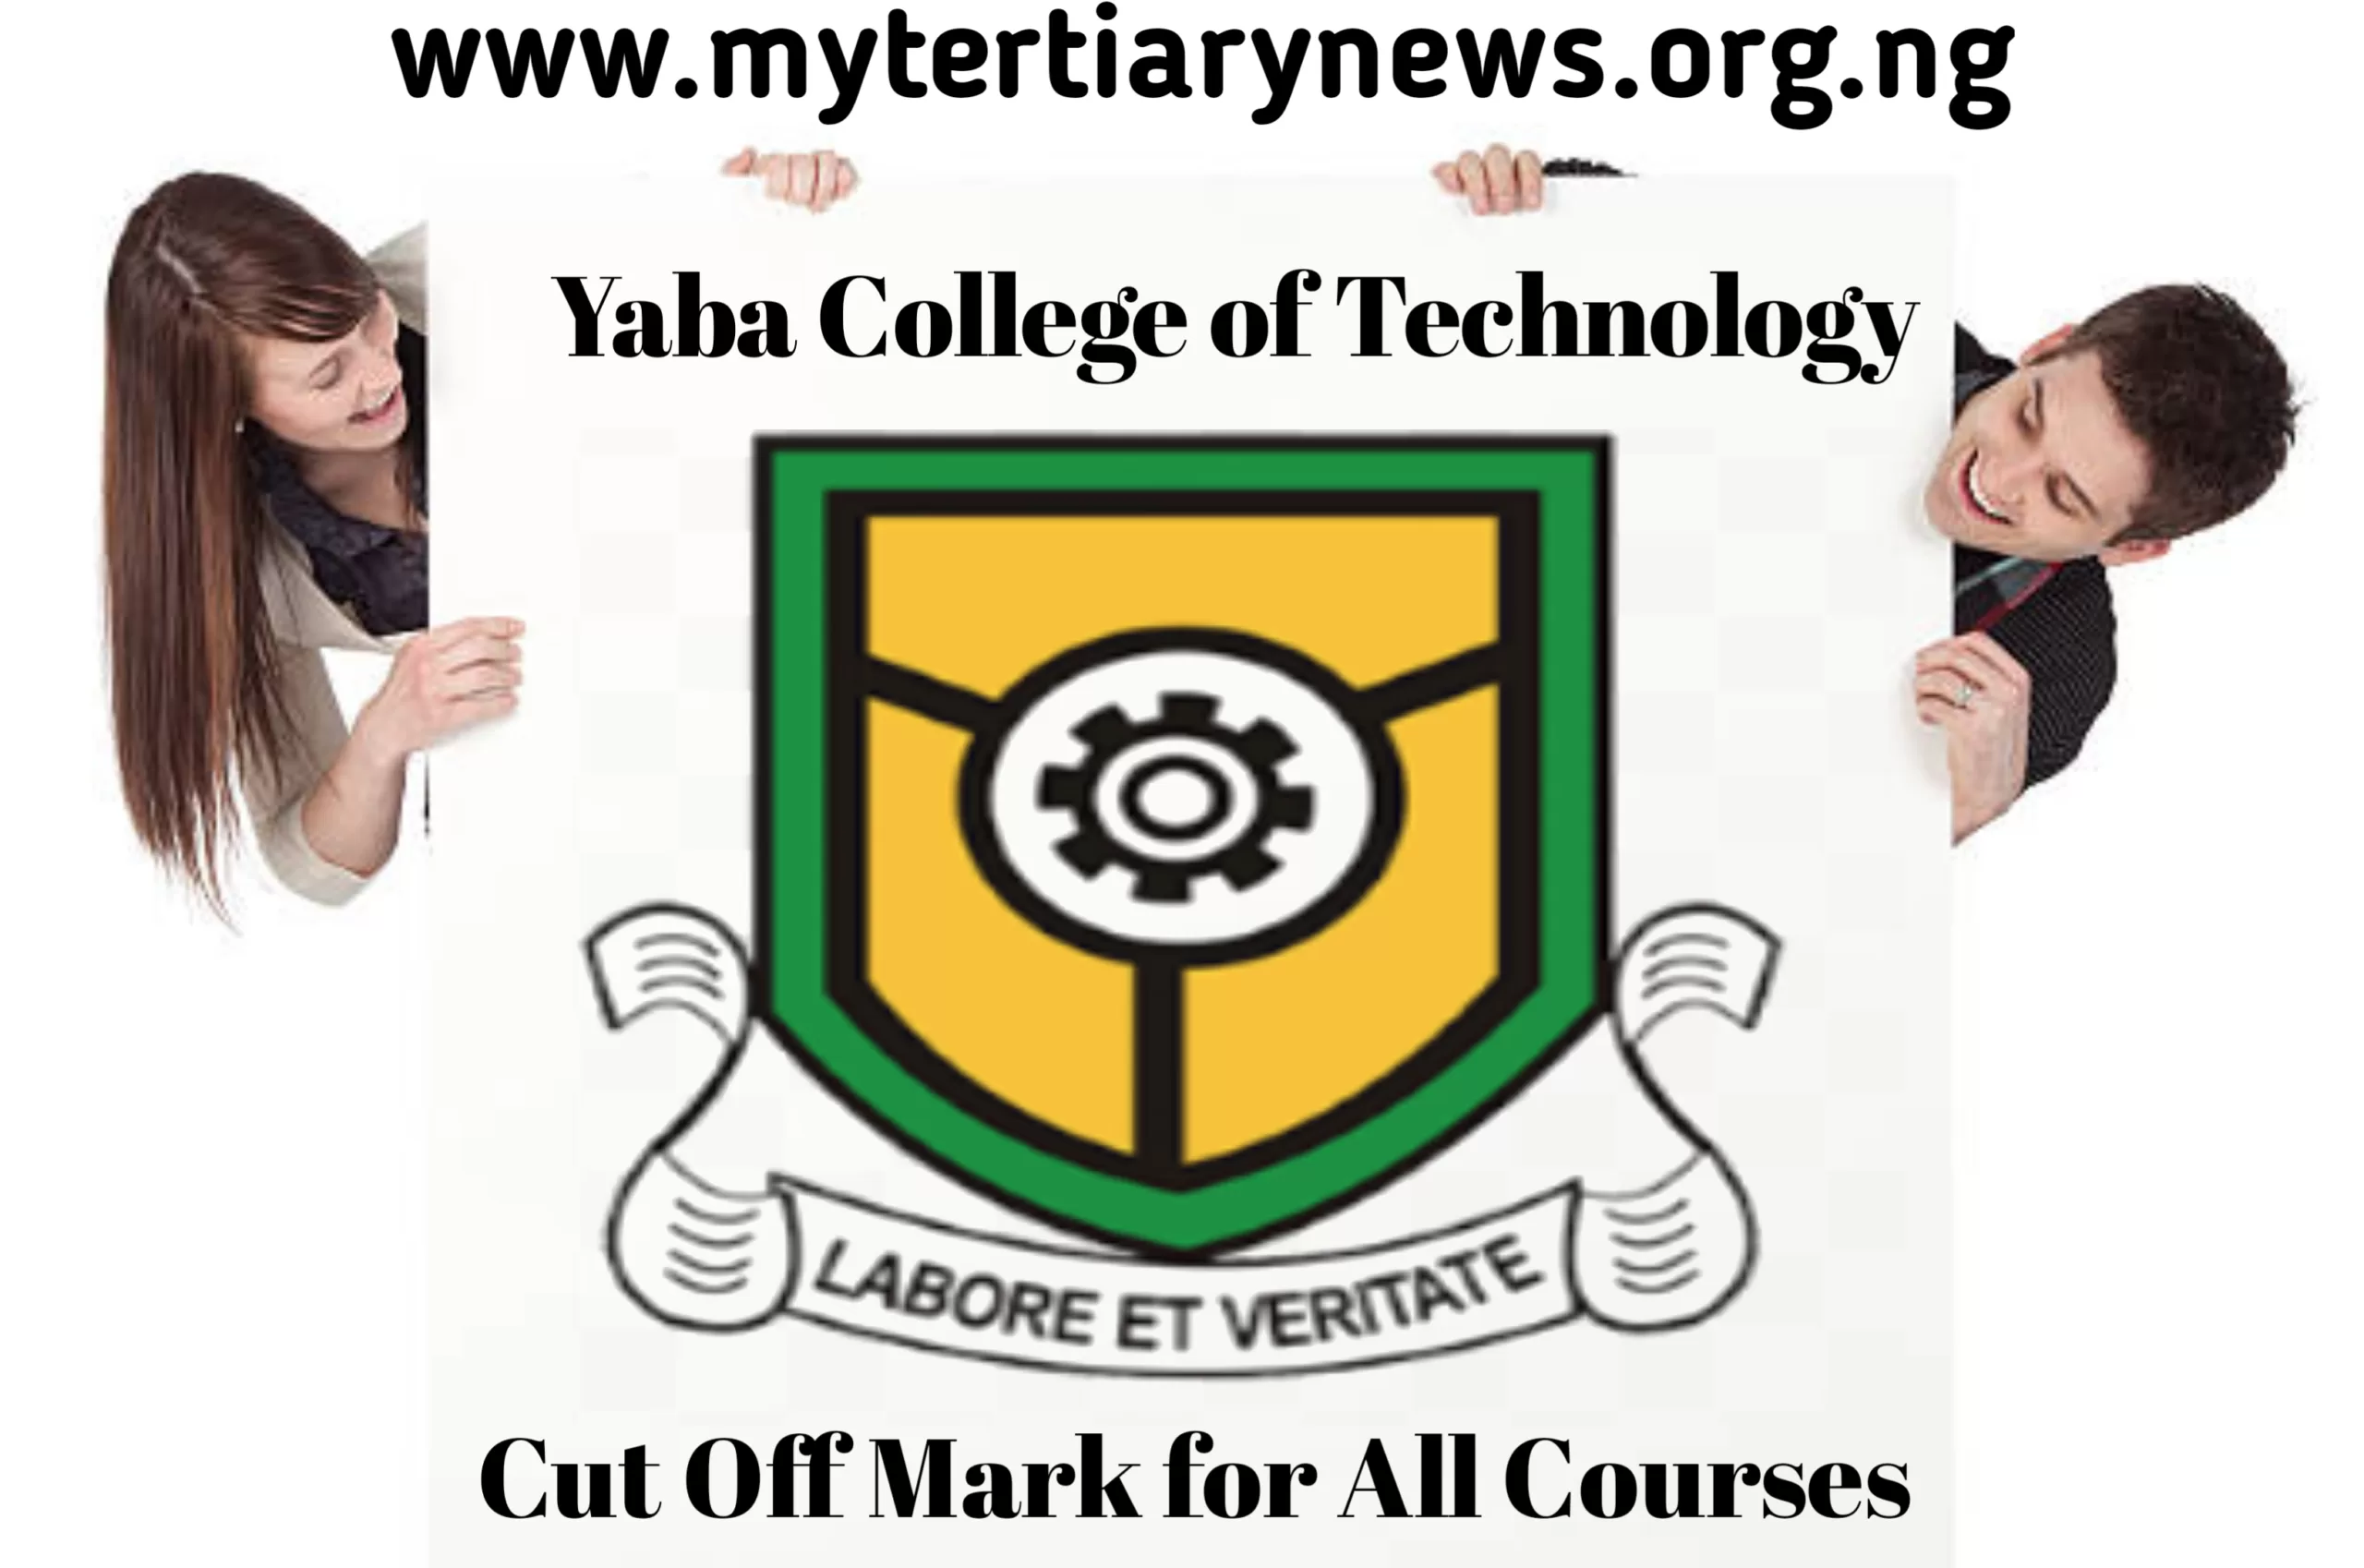 YABATECH Image || YABATECH Cut Off Mark for All Courses